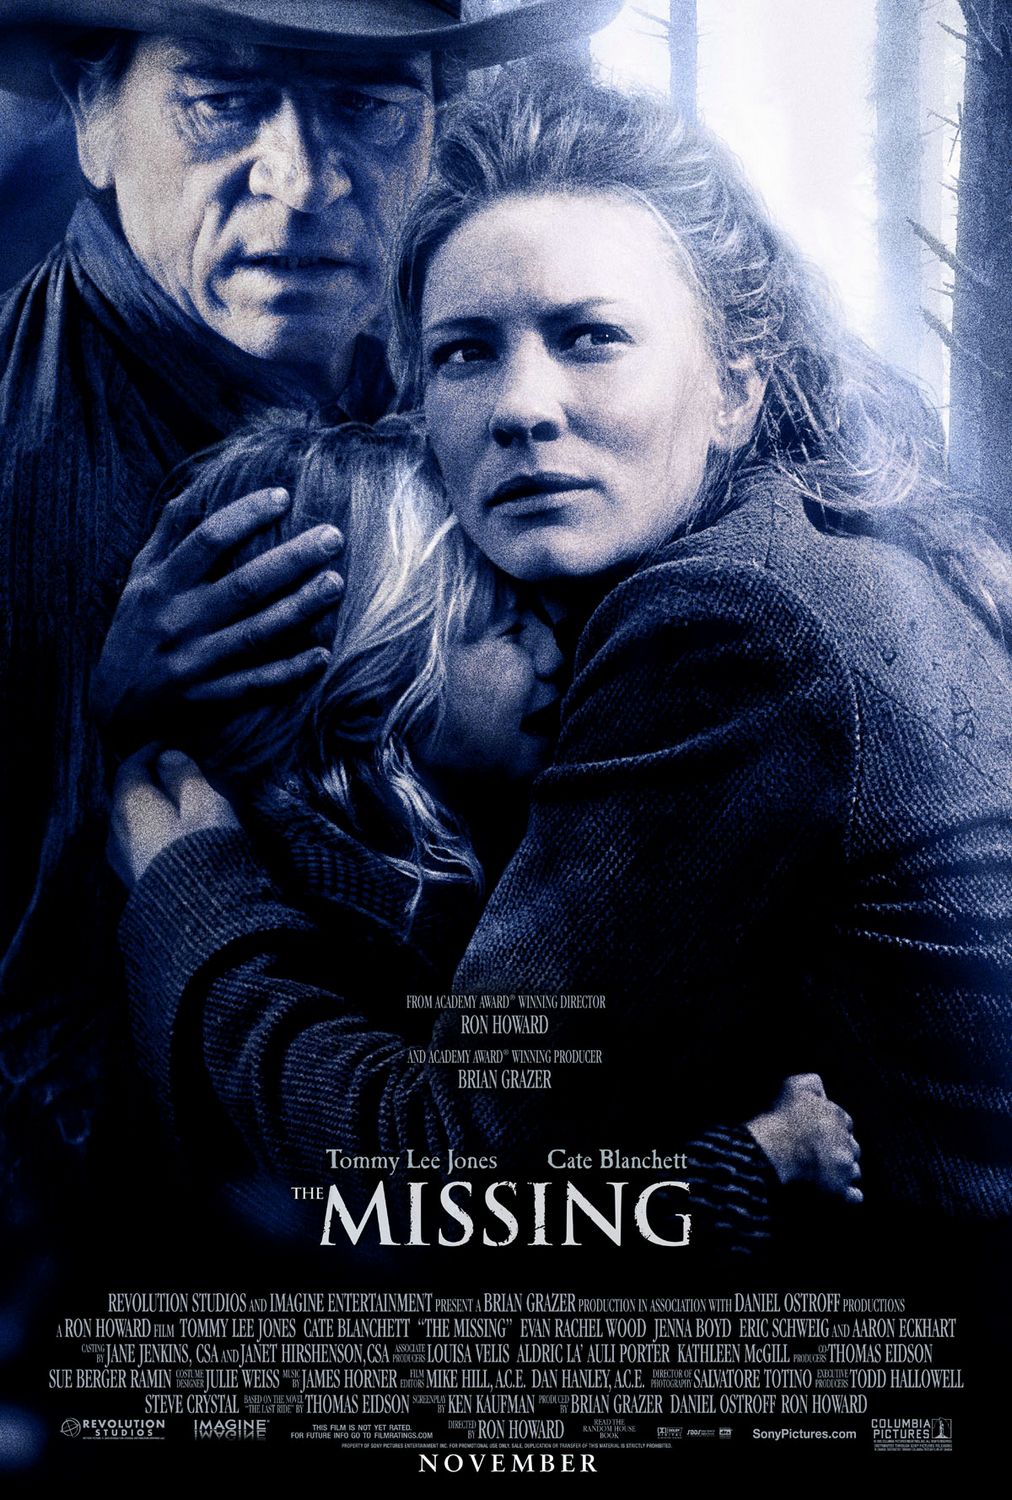 TheMissing-Posters_001.jpg